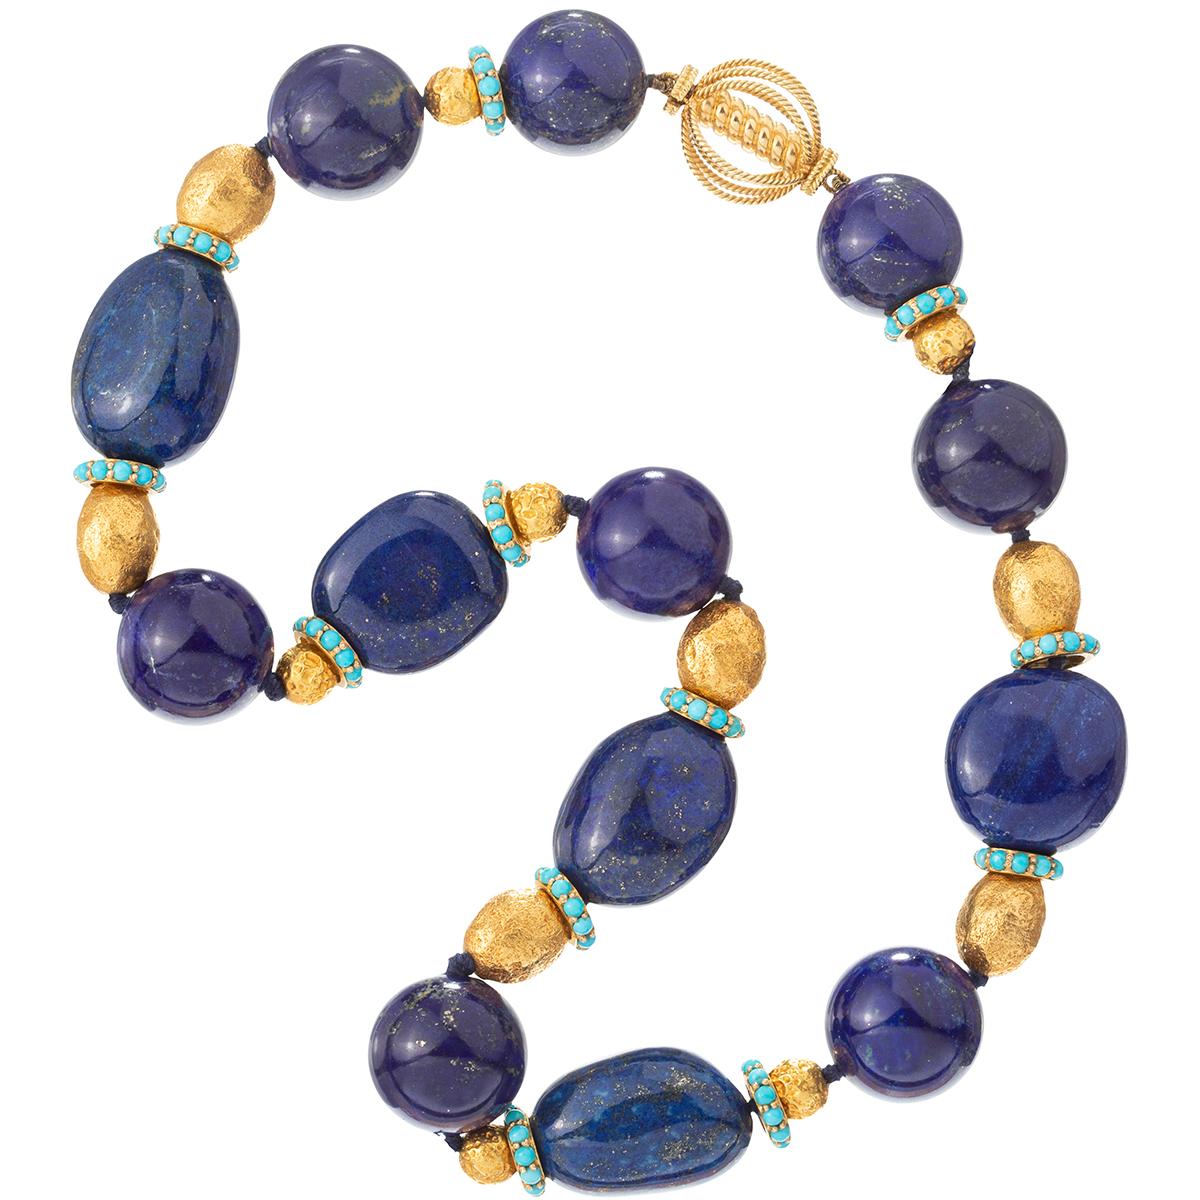 Bead necklace, featuring lapis beads alternating with 18k yellow gold beads and gold rondelles studded around the exterior with cabochon turquoise, secured by an 18k yellow gold open cage-style ball clasp.  Clasp signed 'VERDURA'.  19